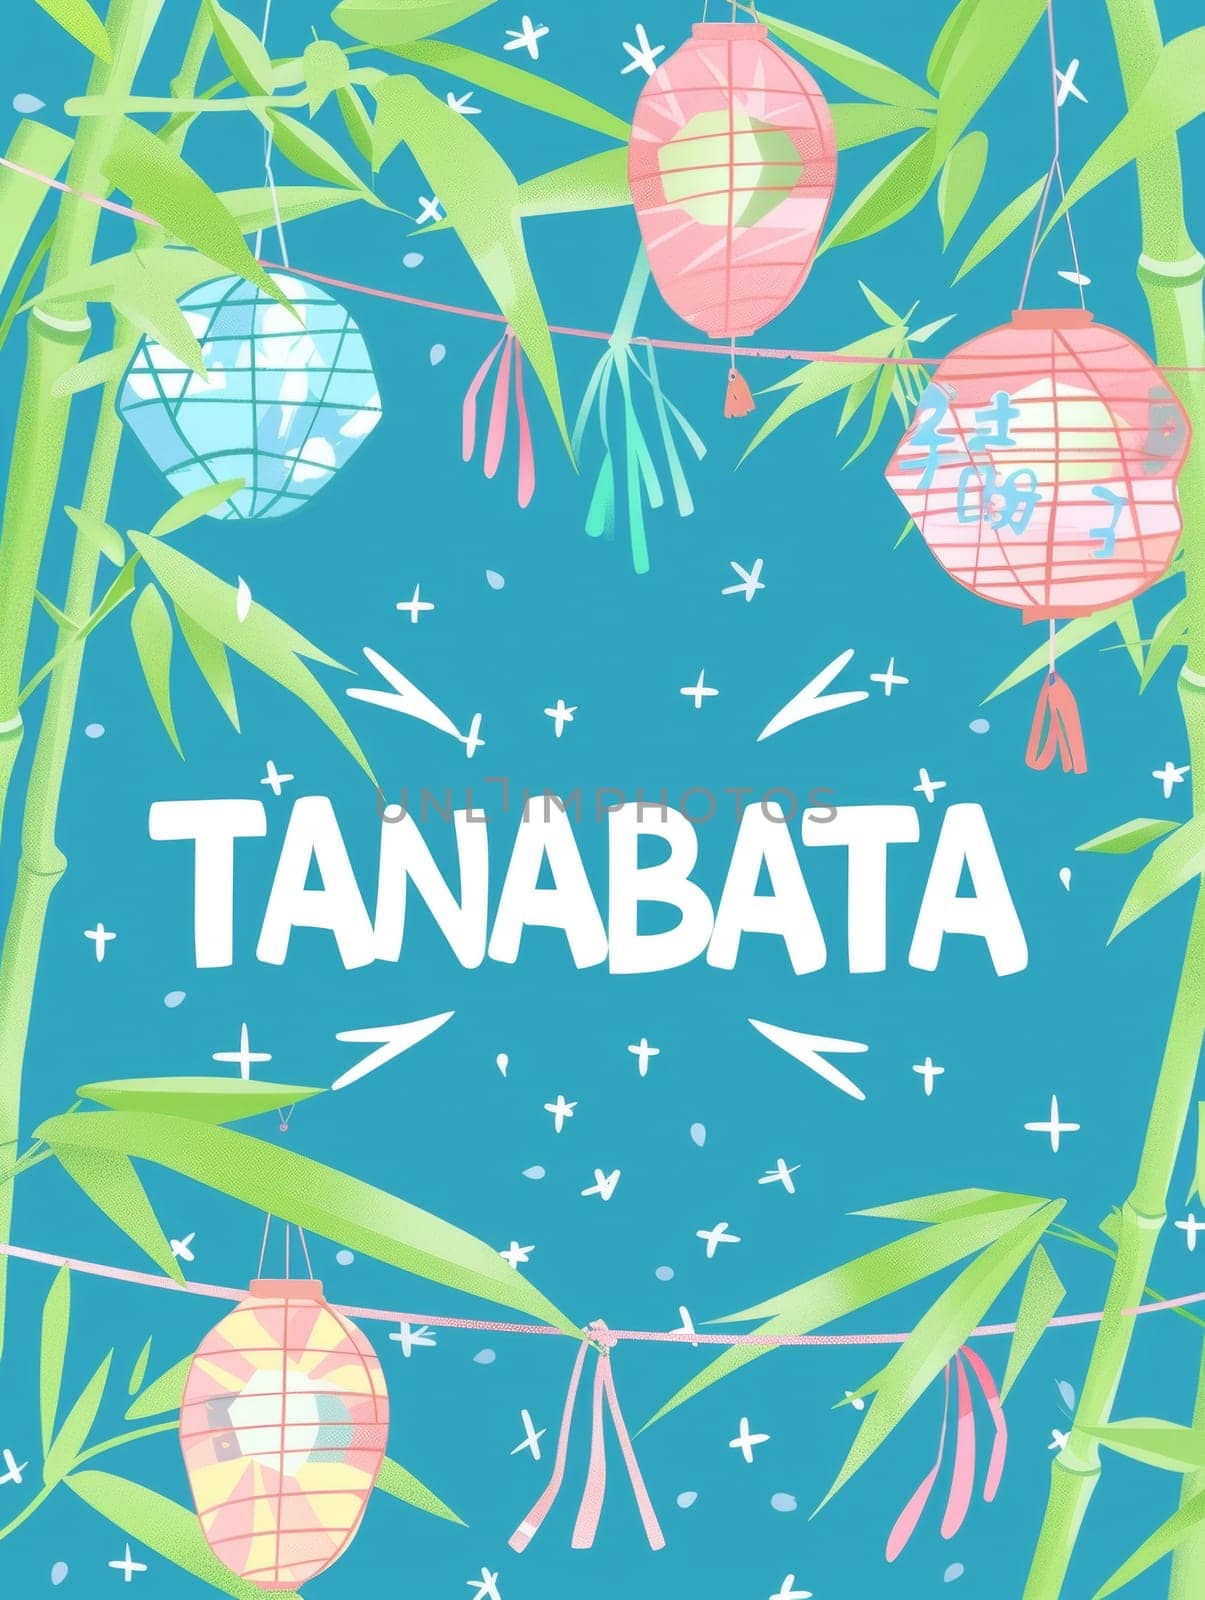 Enchanting bamboo lanterns float on a tranquil turquoise background, dotted with white stars for Tanabata, invoking the romance of the Japanese star festival